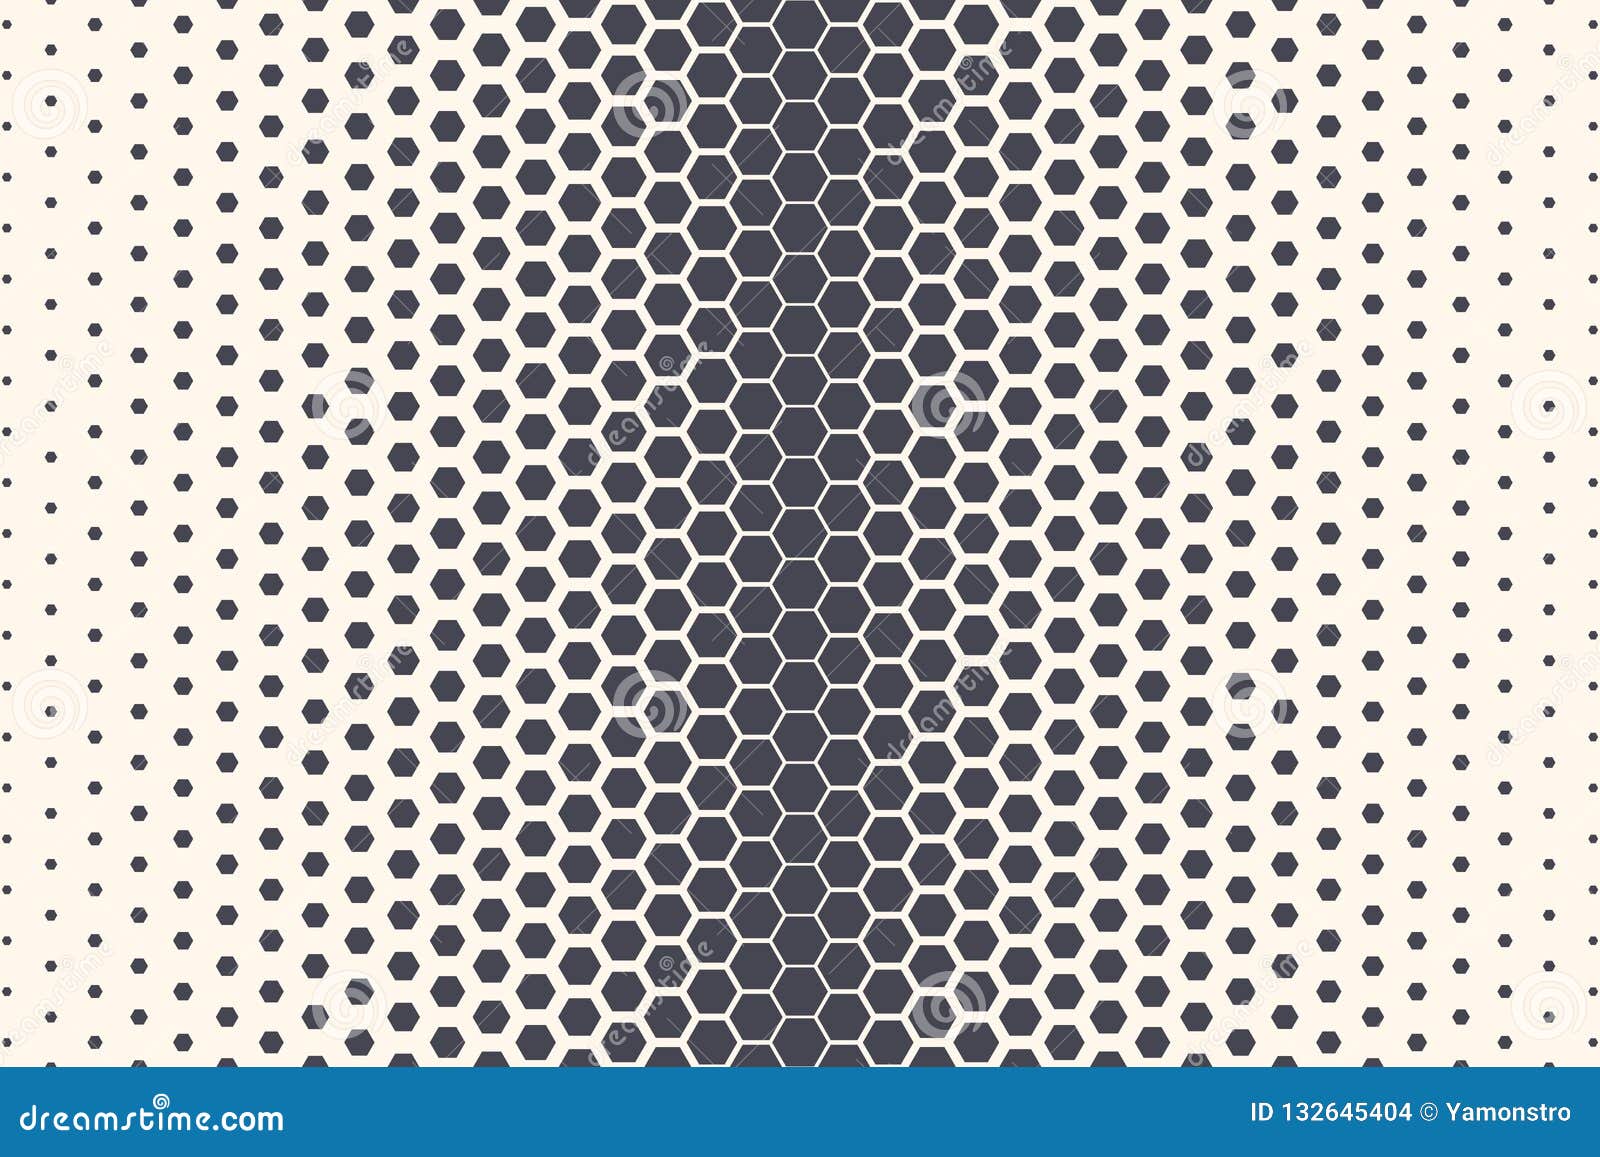 hexagon  abstract technology background